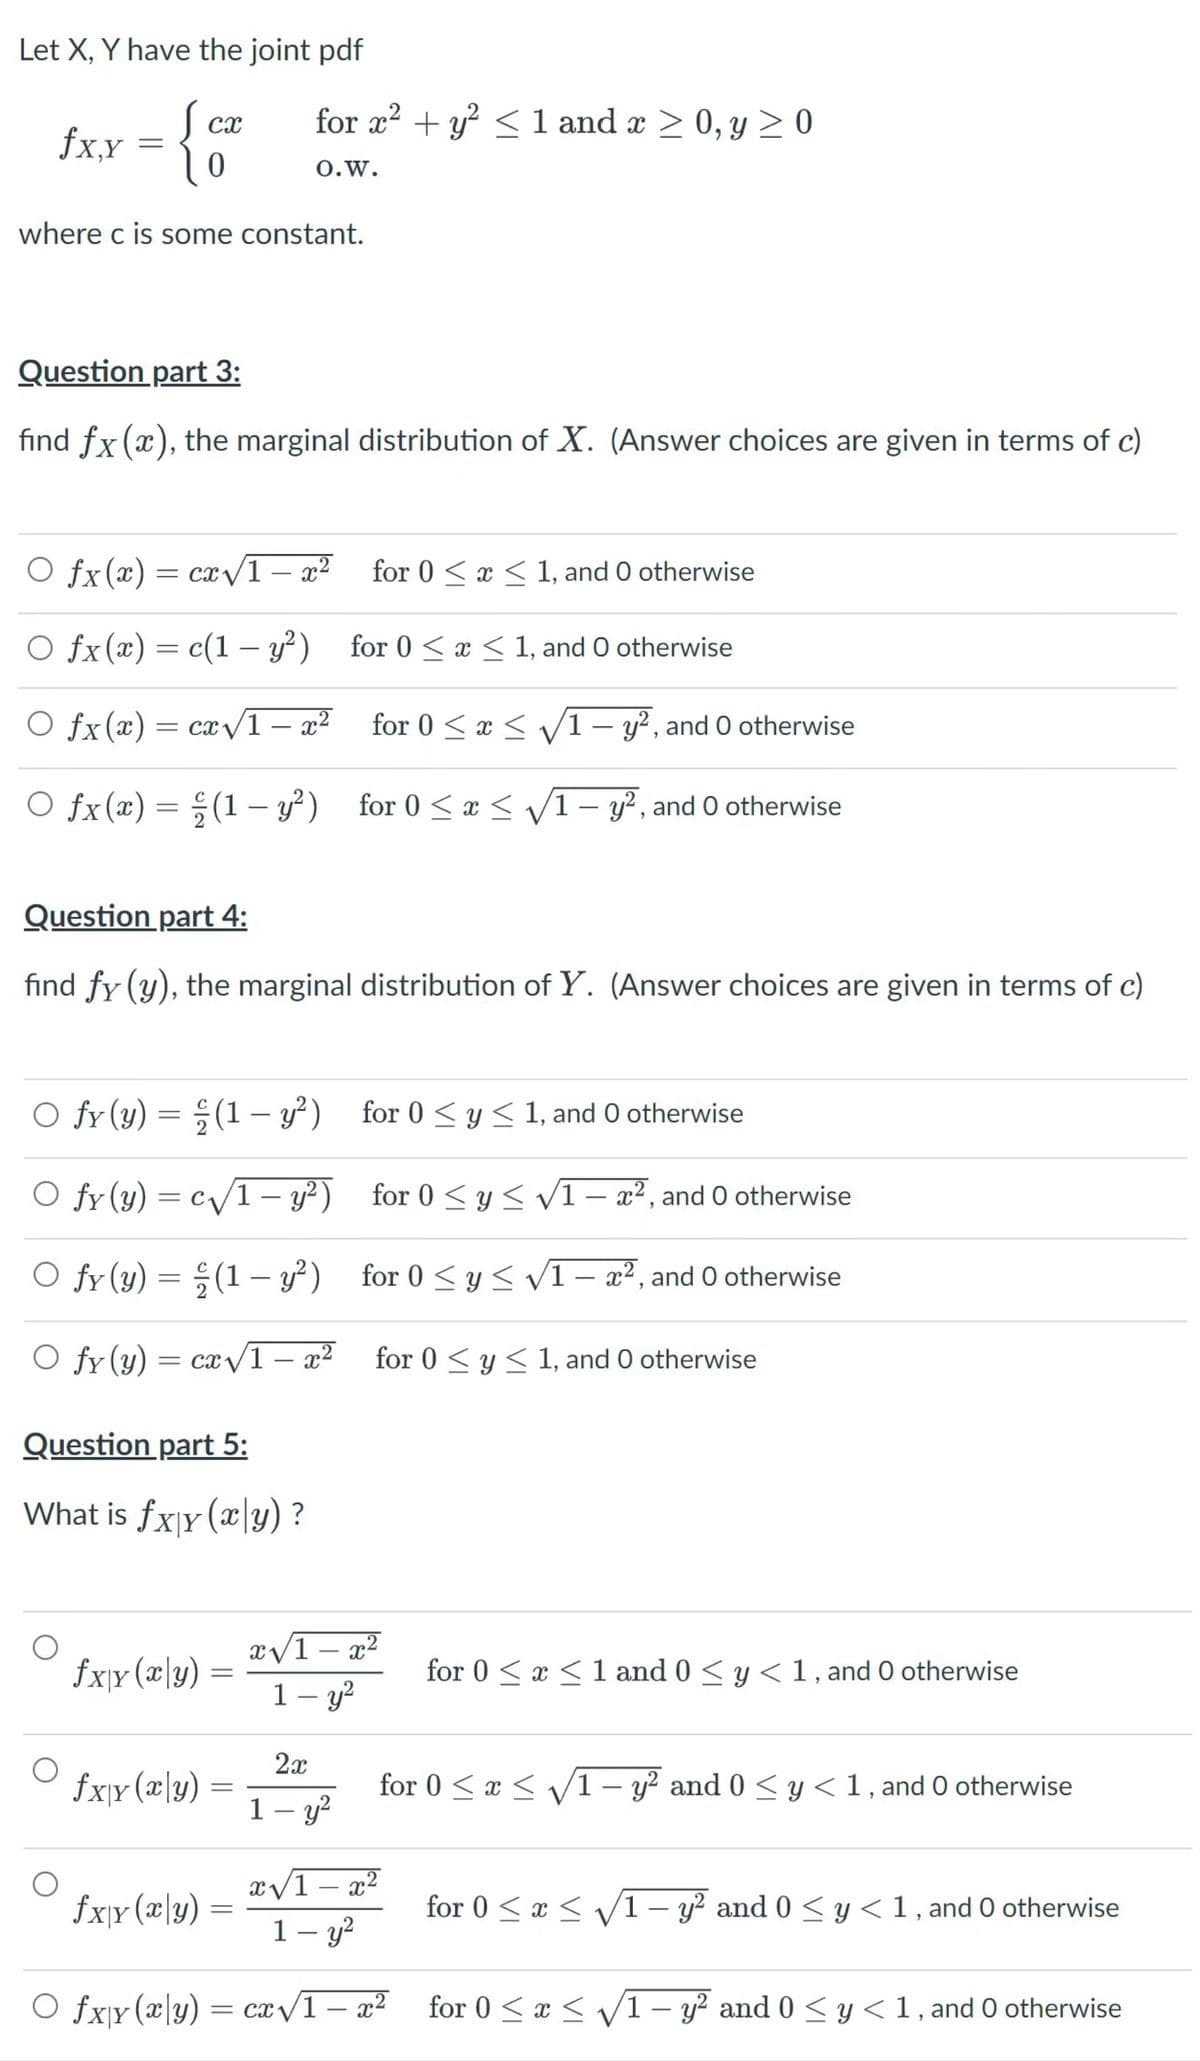 Let X, Y have the joint pdf
Scx
fxx = {0
for r?
+ y² <1 and x > 0, y > 0
0.w.
where c is some constant.
Question part 3:
find fx (x), the marginal distribution of X. (Answer choices are given in terms of c)
O fx(x)= cx/1- x² for 0 < x < 1, and 0 otherwise
O fx(x) = c(1 – y²)
for 0 < x < 1, and O otherwise
O fx(x)= cx/1
– x²
for 0 < x < v/1 – y?, and O otherwise
|
O fx(x) = ; (1 – y?) for 0 < x < V1- y², and 0 otherwise
|
Question part 4:
find fy (y), the marginal distribution of Y. (Answer choices are given in terms of c)
fy (y) = ;(1 – y²) for 0 < y < 1, and O otherwise
O fy (y) = c/1- y²) for 0 < y < vI- x², and 0 otherwise
fy (y) = ;(1 – y²) for 0 <y < V1– a², and 0 otherwise
O fr (y)
= cx v1 – x² for 0 < y< 1, and 0 otherwise
for 0 < y < 1, and O otherwise
-
Question part 5:
What is fxjy (x\y) ?
x/1 – x²
-
fxjr (x\y)
for 0 < x <1 and 0 < y < 1, and O otherwise
1– y?
-
2x
fx\r(x\y)
for 0 < x < /1– y? and 0 < y<1, and 0 otherwise
1 – y?
x/1 – x²
1– y?
fx}r (æ\y)
for 0 < x < V1 – y² and 0 < y <1, and O otherwise
-
O fx\y (x\y) = ca/1 – a²
for 0 < x < /1 – y? and 0 < y < 1, and 0 otherwise
